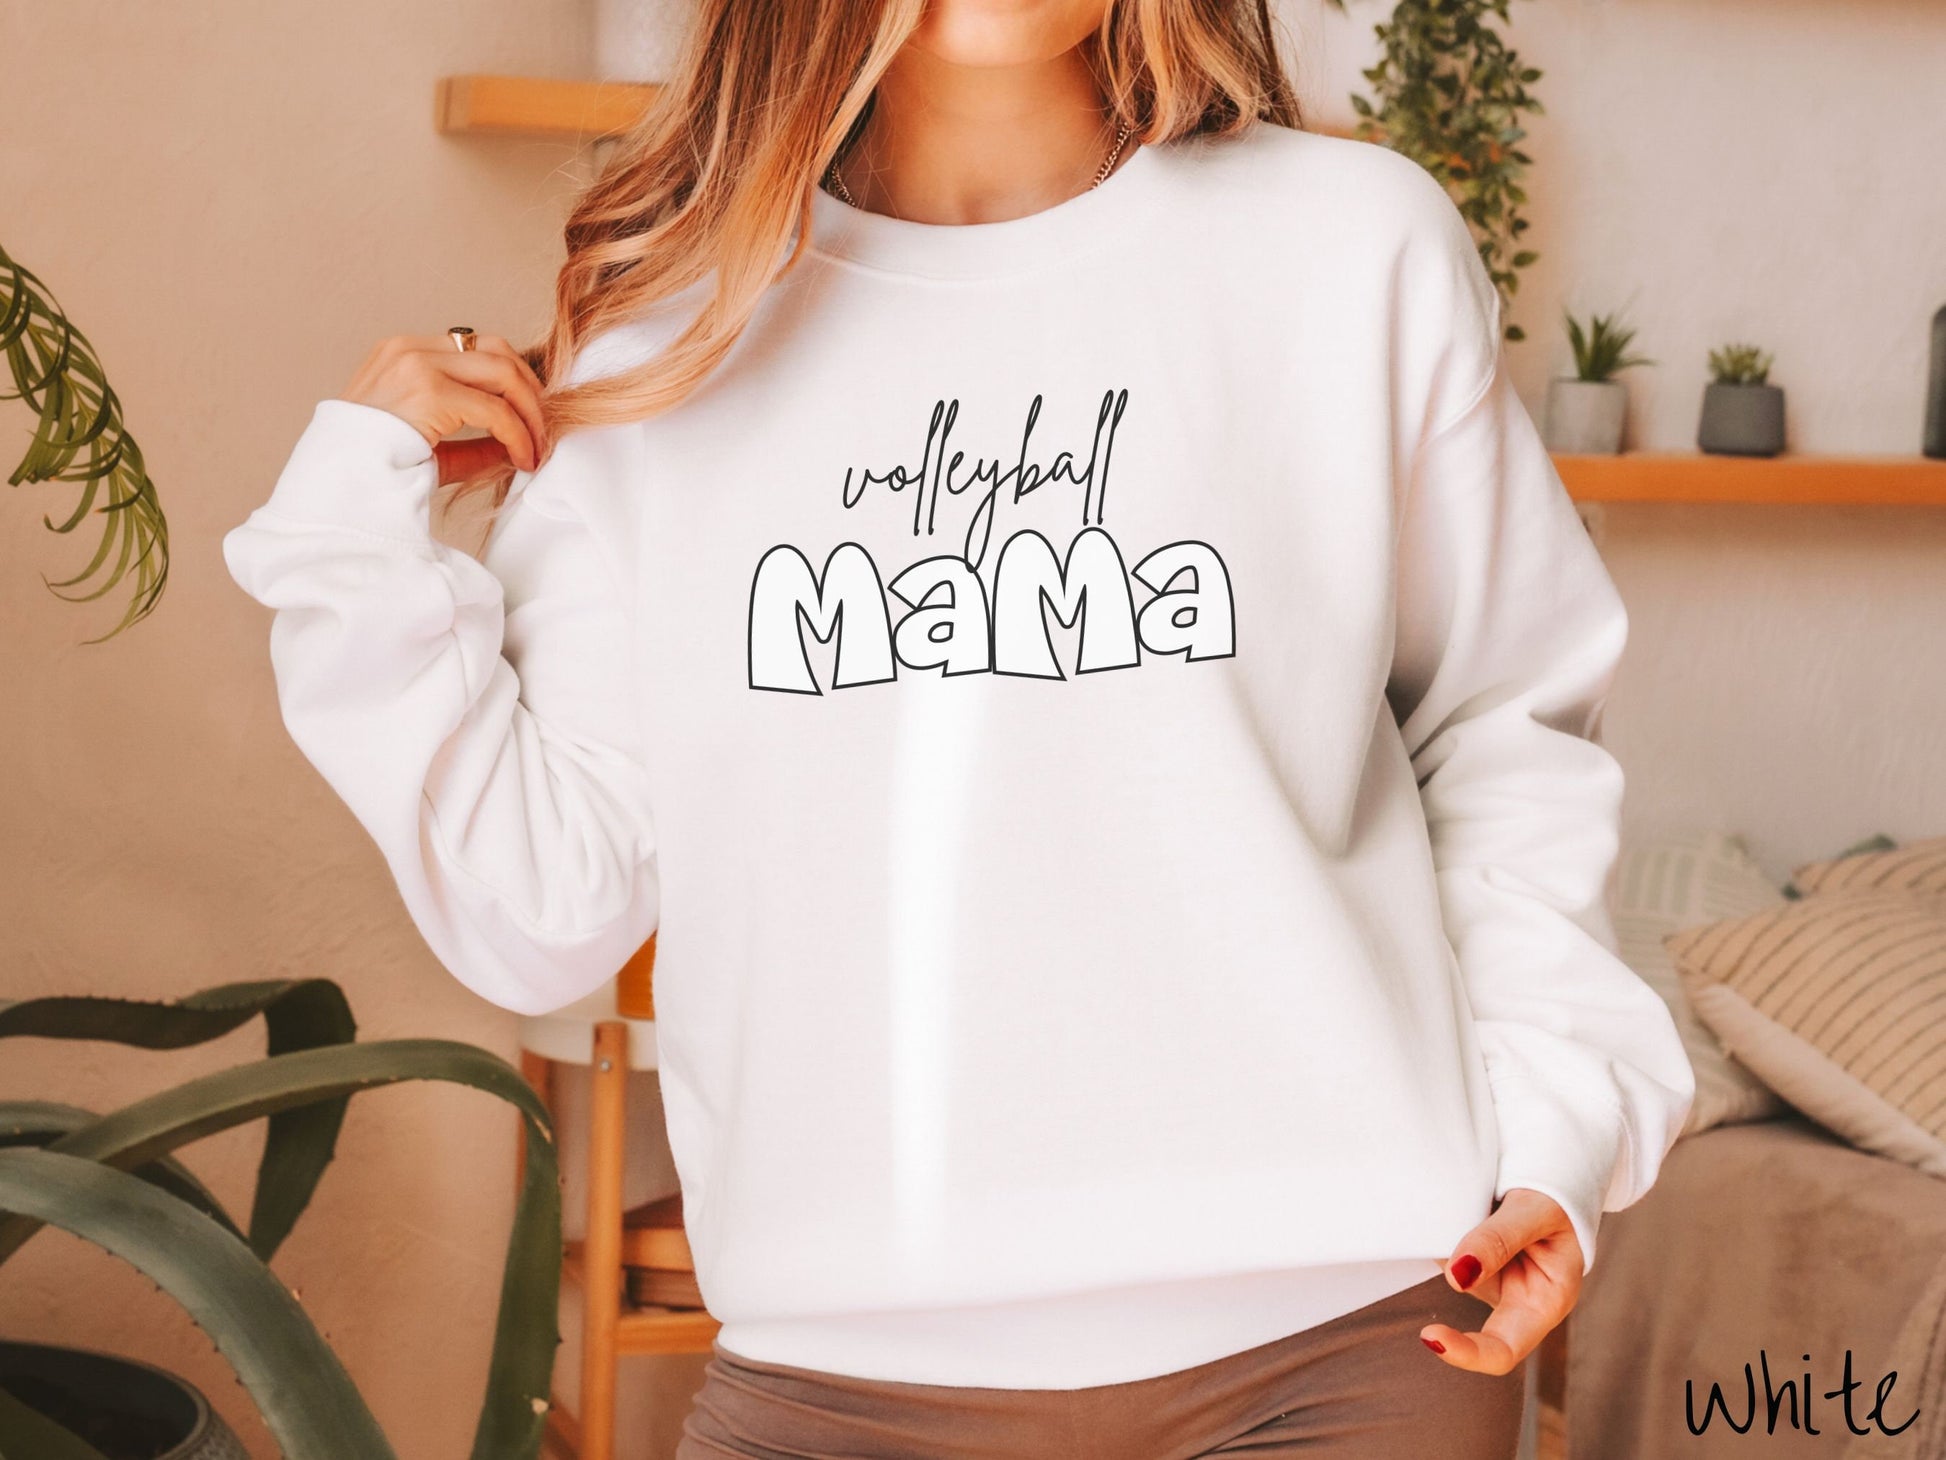 A woman wearing a cute, vintage white colored sweatshirt with the word volleyball across the front in black, undercase cursive writing. Below that is the word Mama in large, white font.